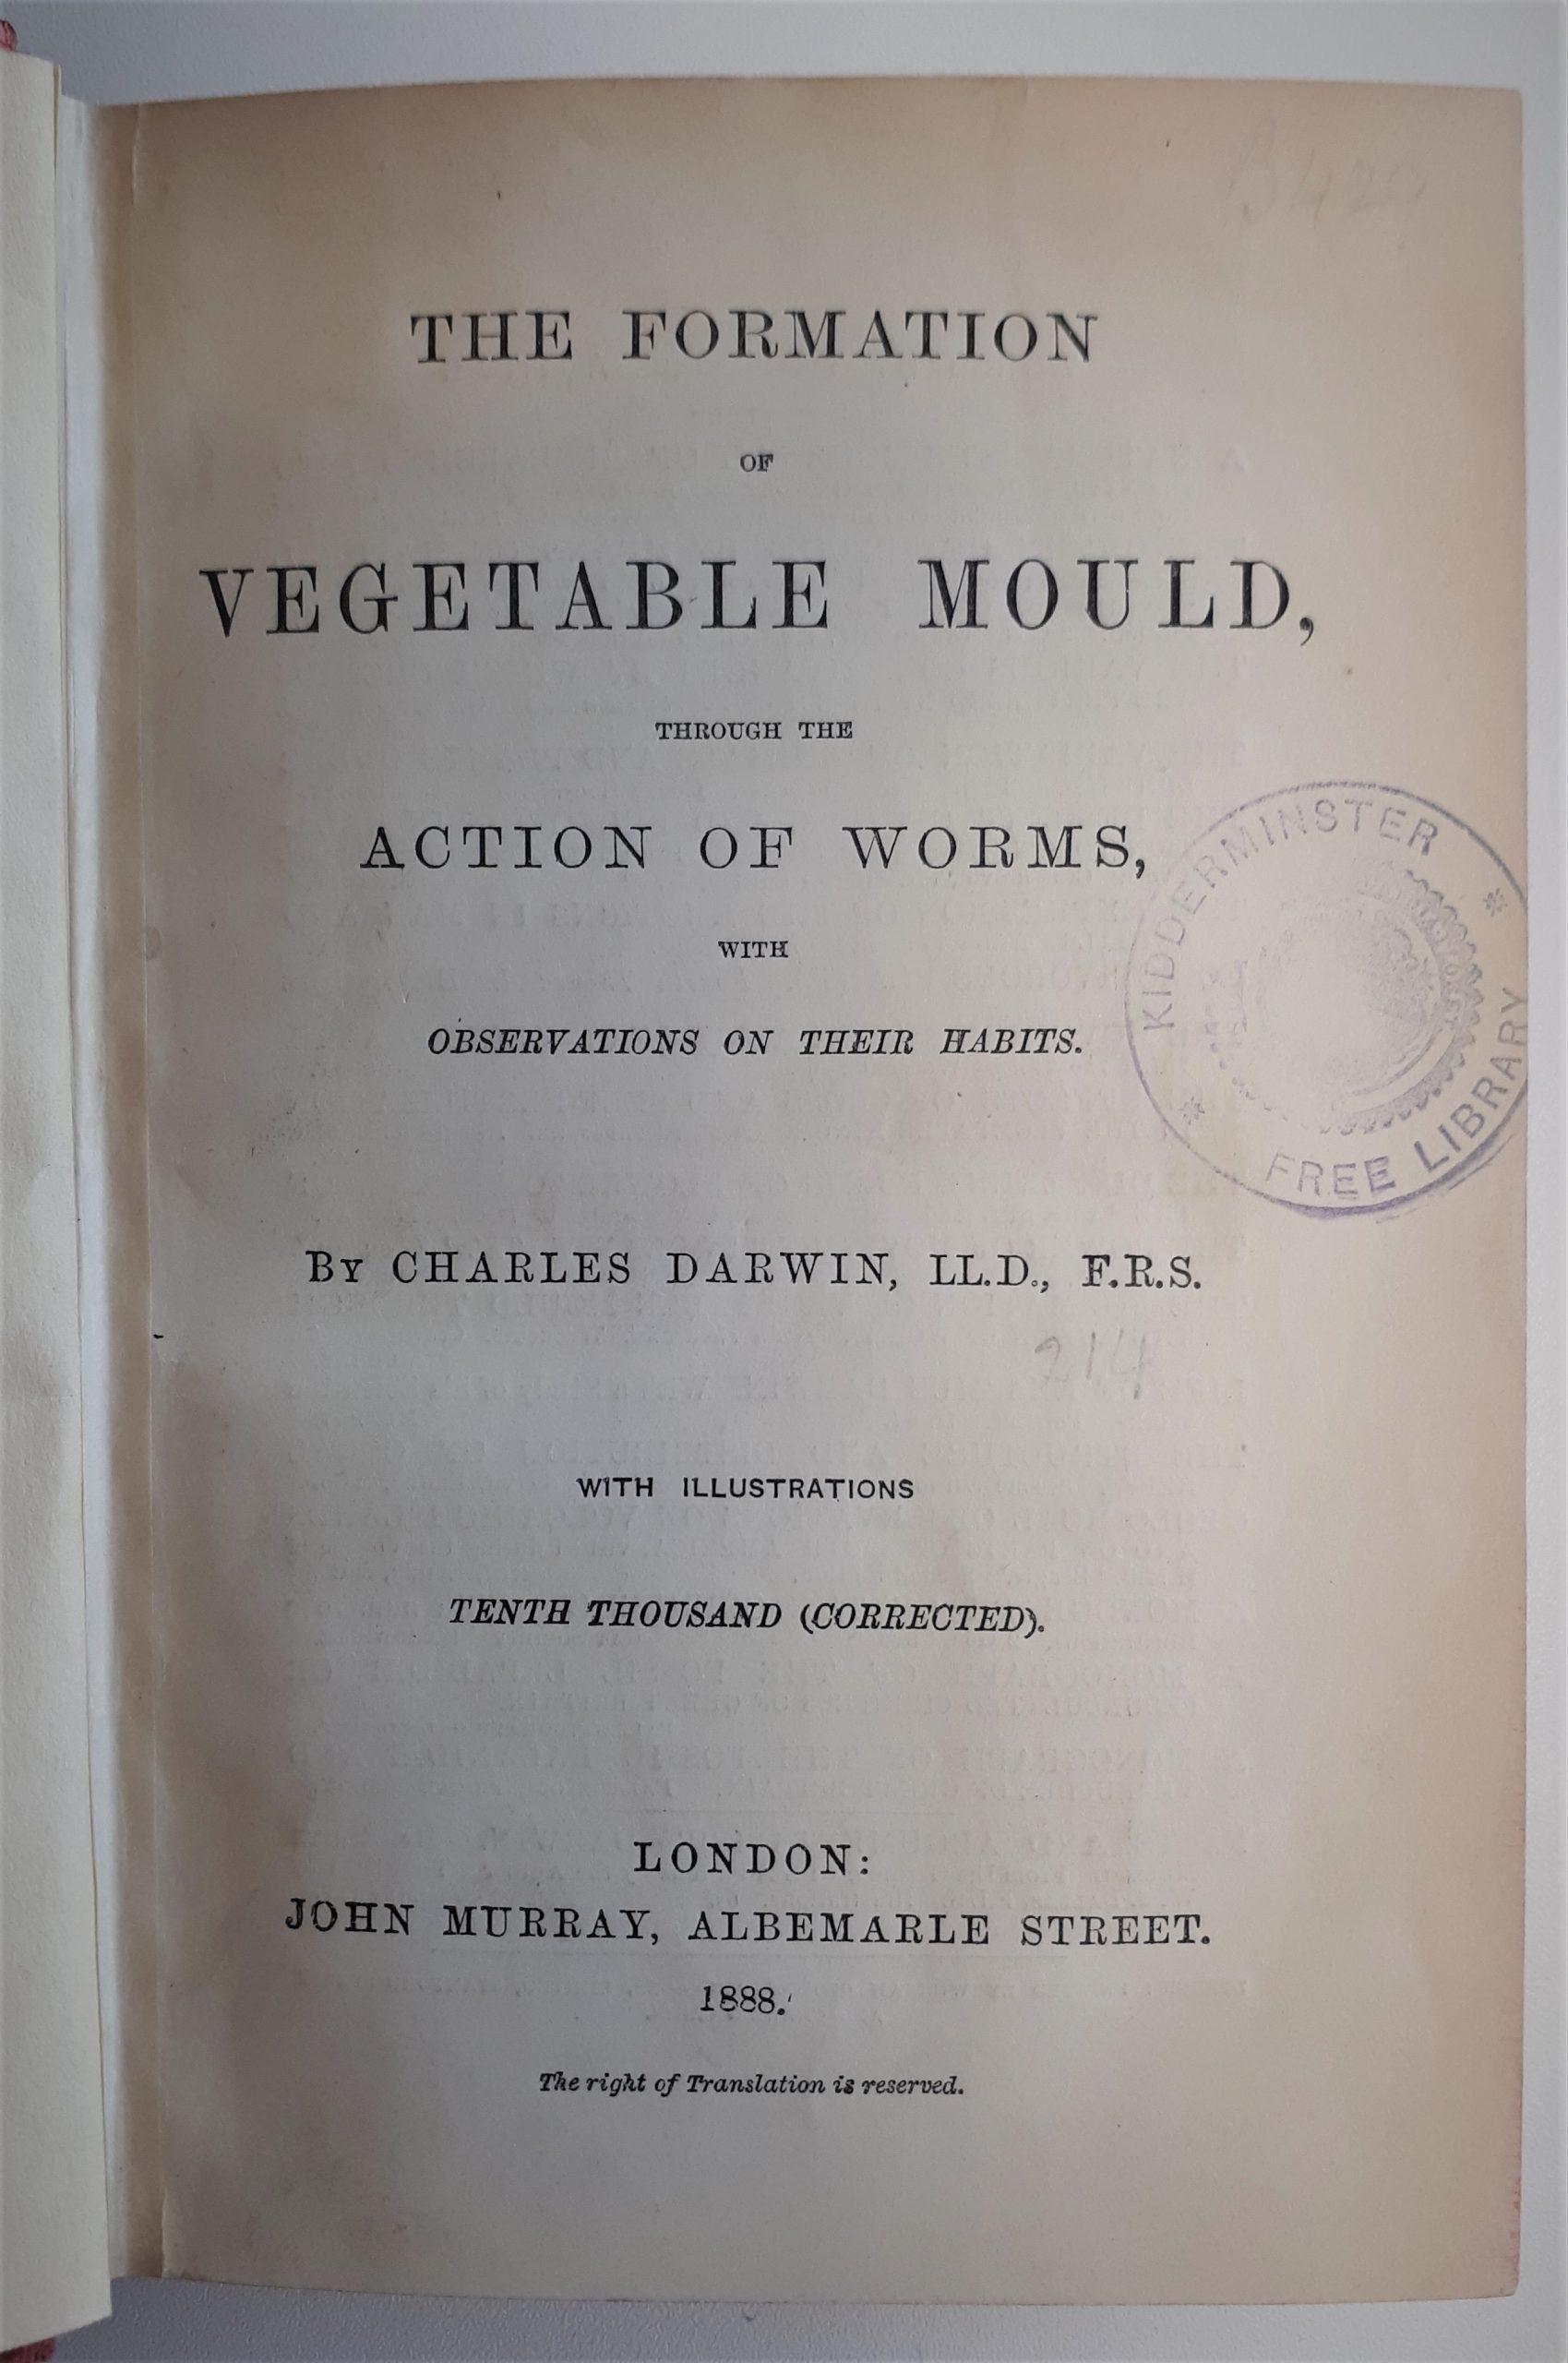 Frontispiece to The Formation of Vegetable Mould through the Action of Worms with Observations on Their Habits © Charles Darwin, 1881 available at Ref 595.146 © Charles Darwin, 1881